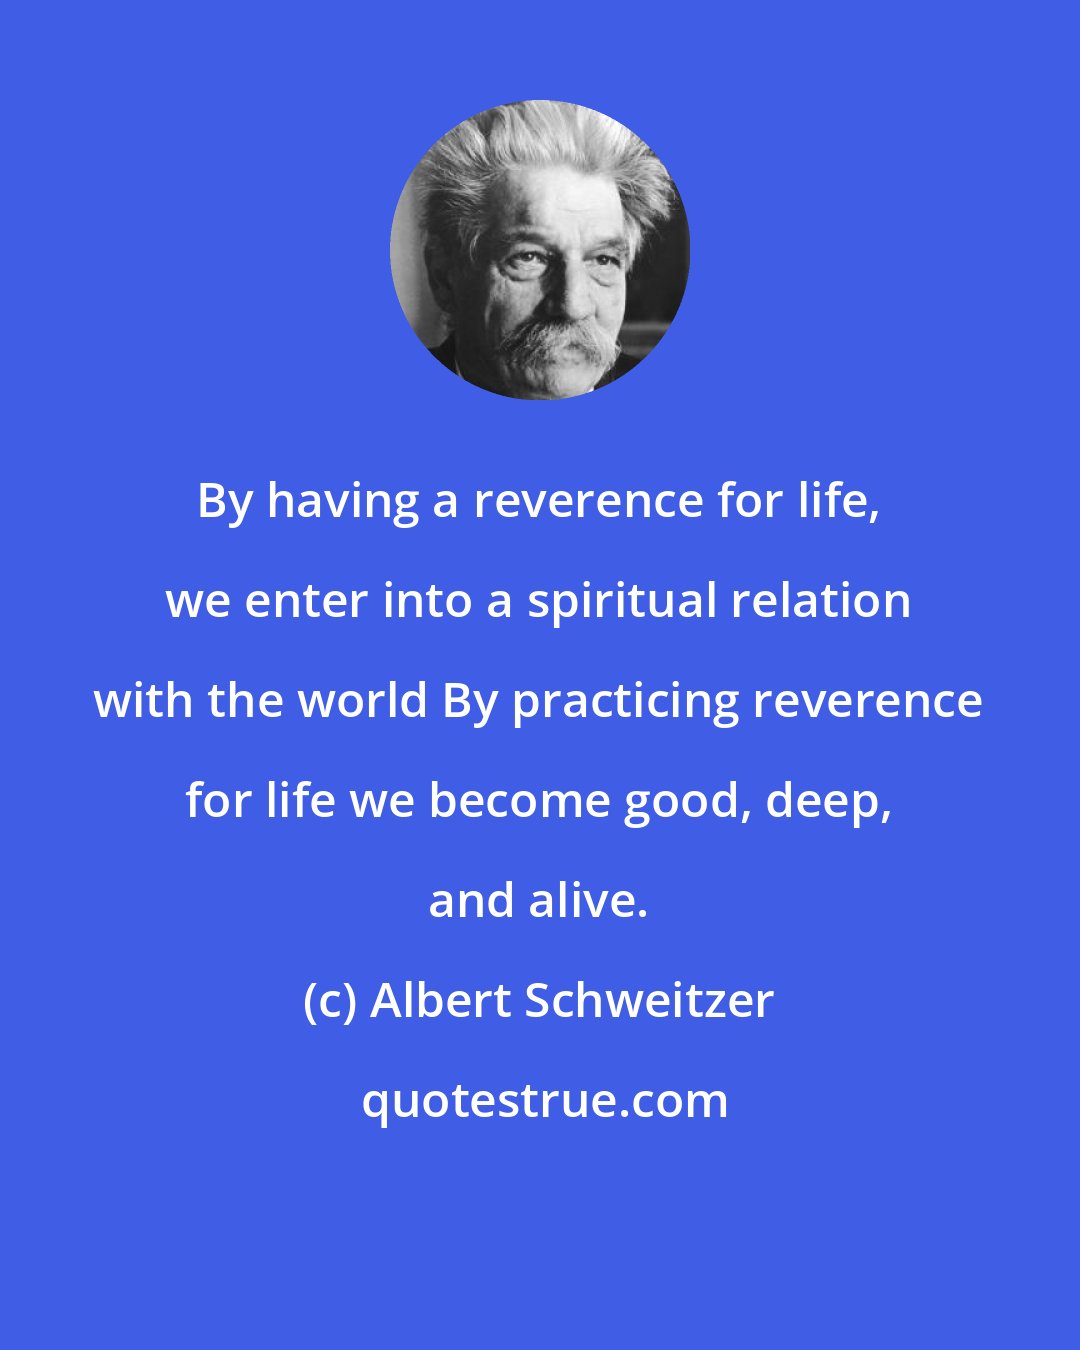 Albert Schweitzer: By having a reverence for life, we enter into a spiritual relation with the world By practicing reverence for life we become good, deep, and alive.